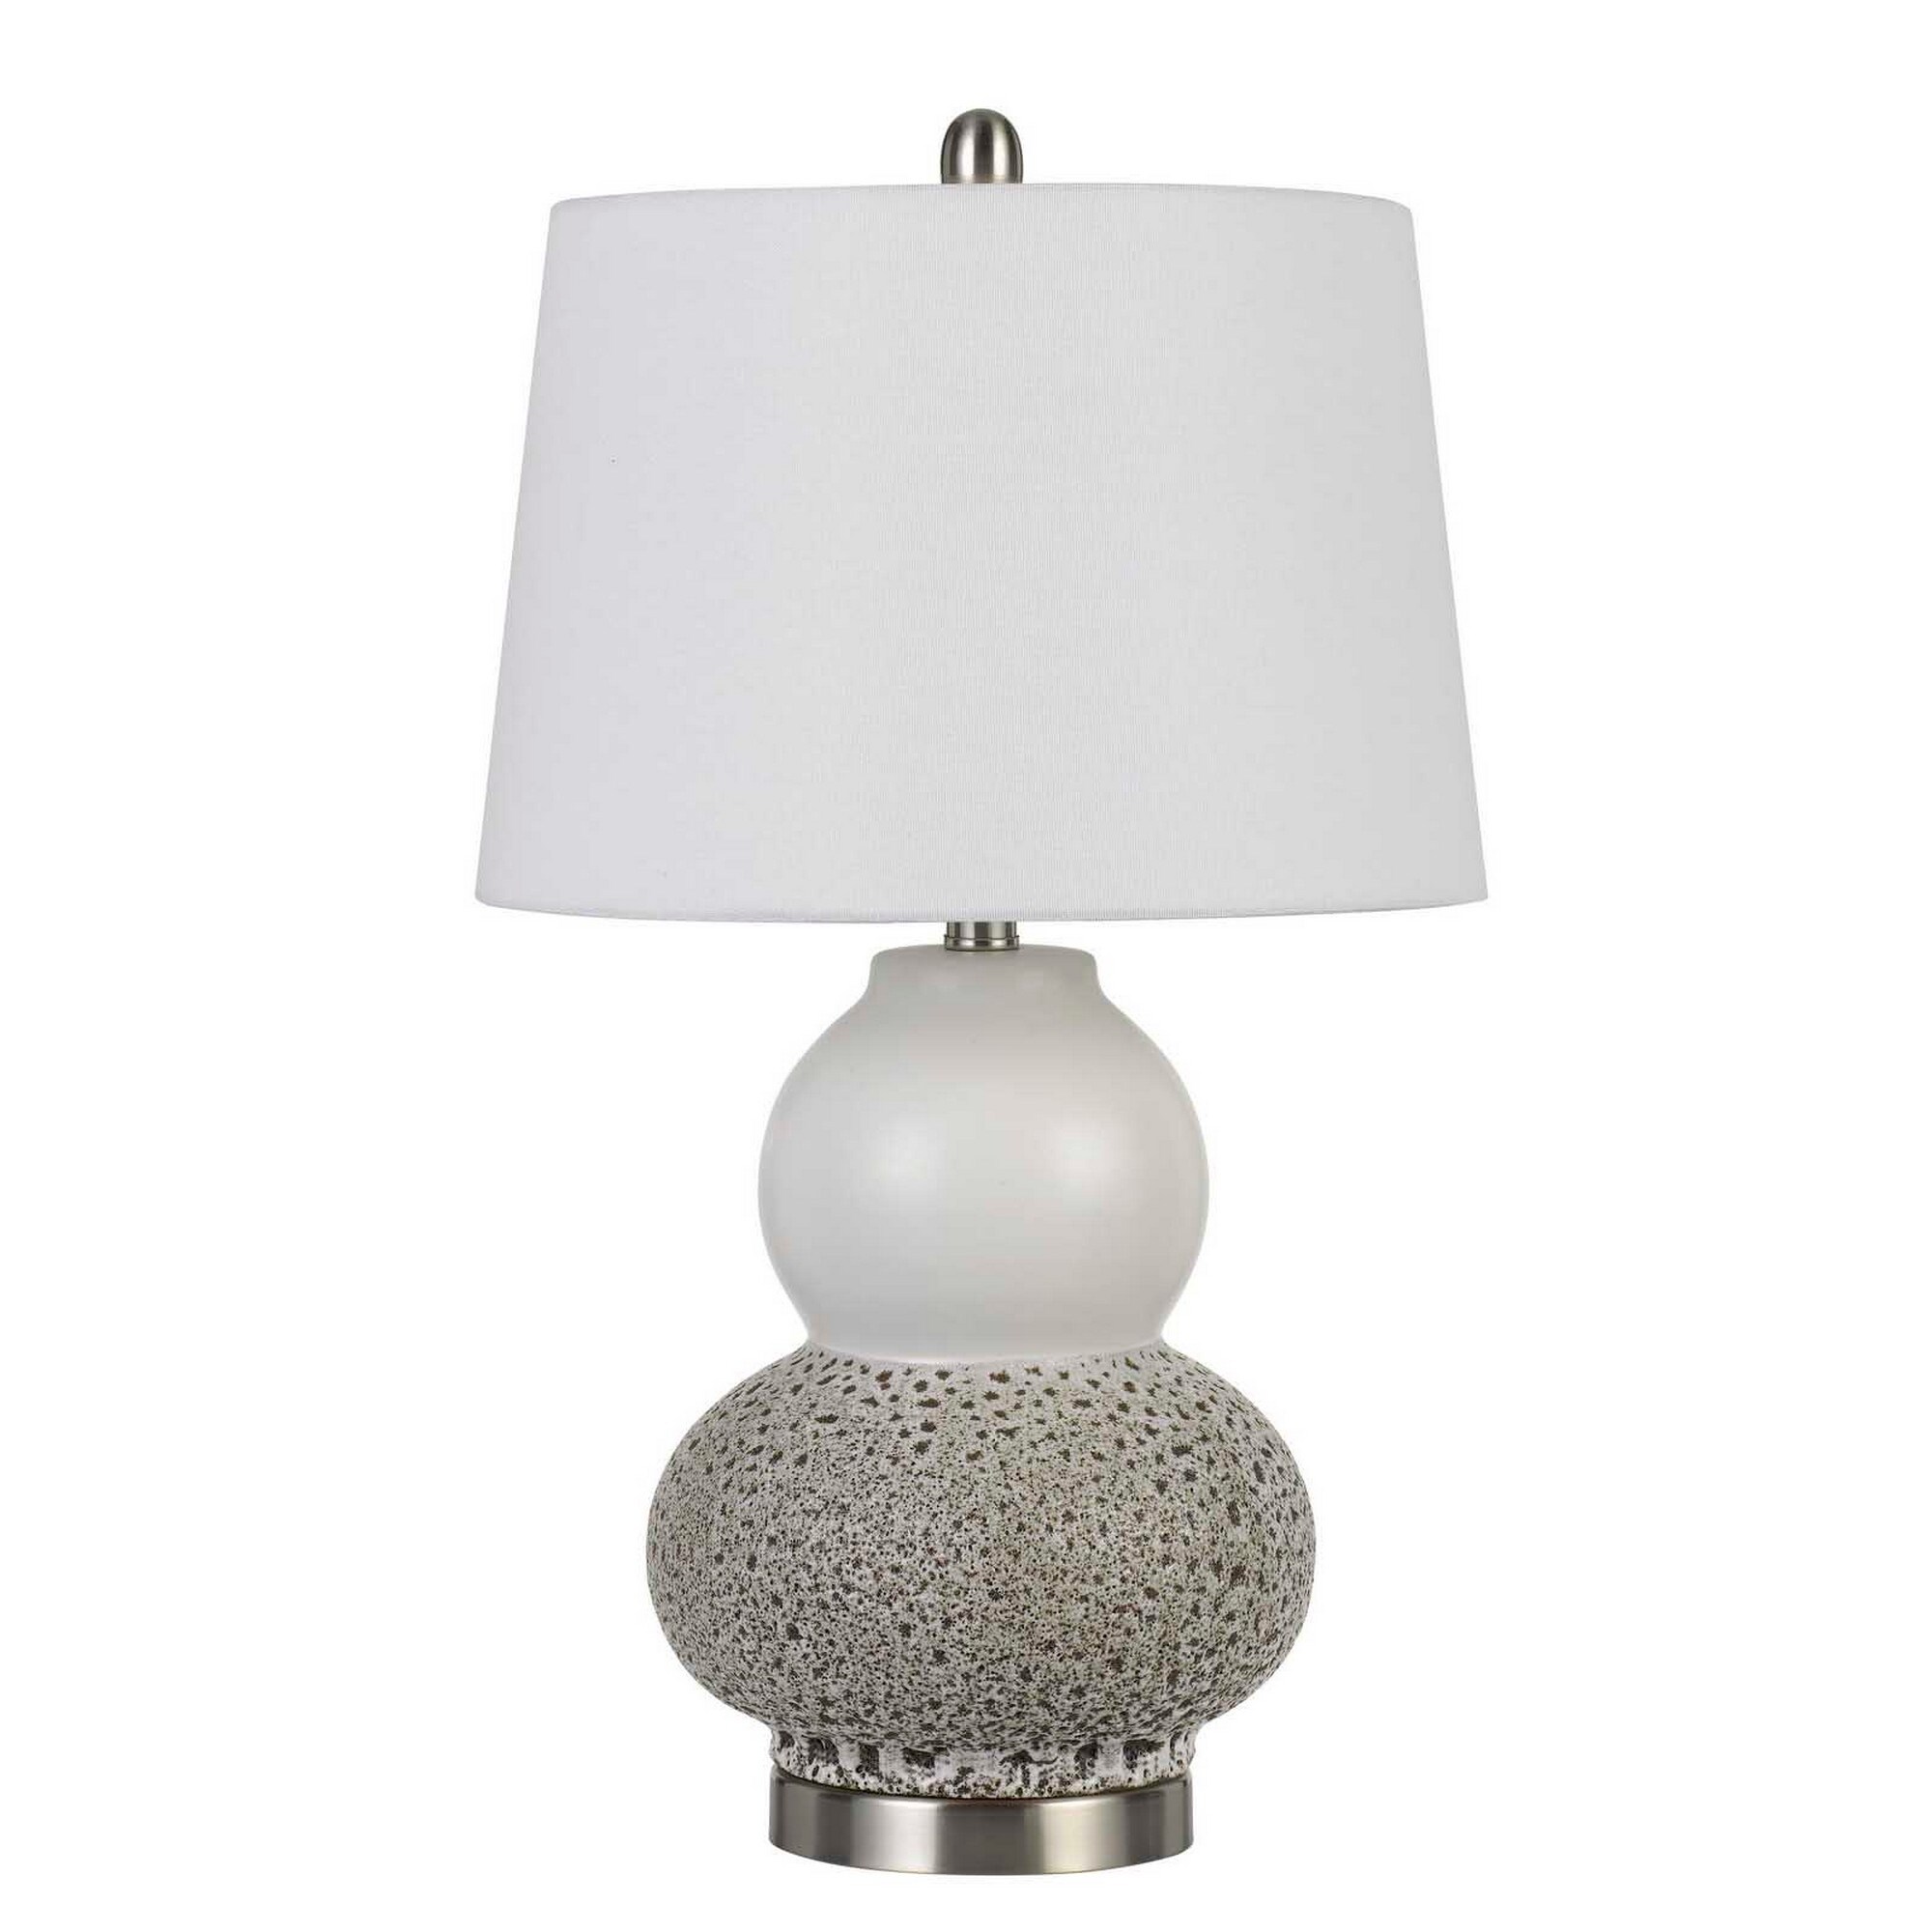 urn shaped table lamps